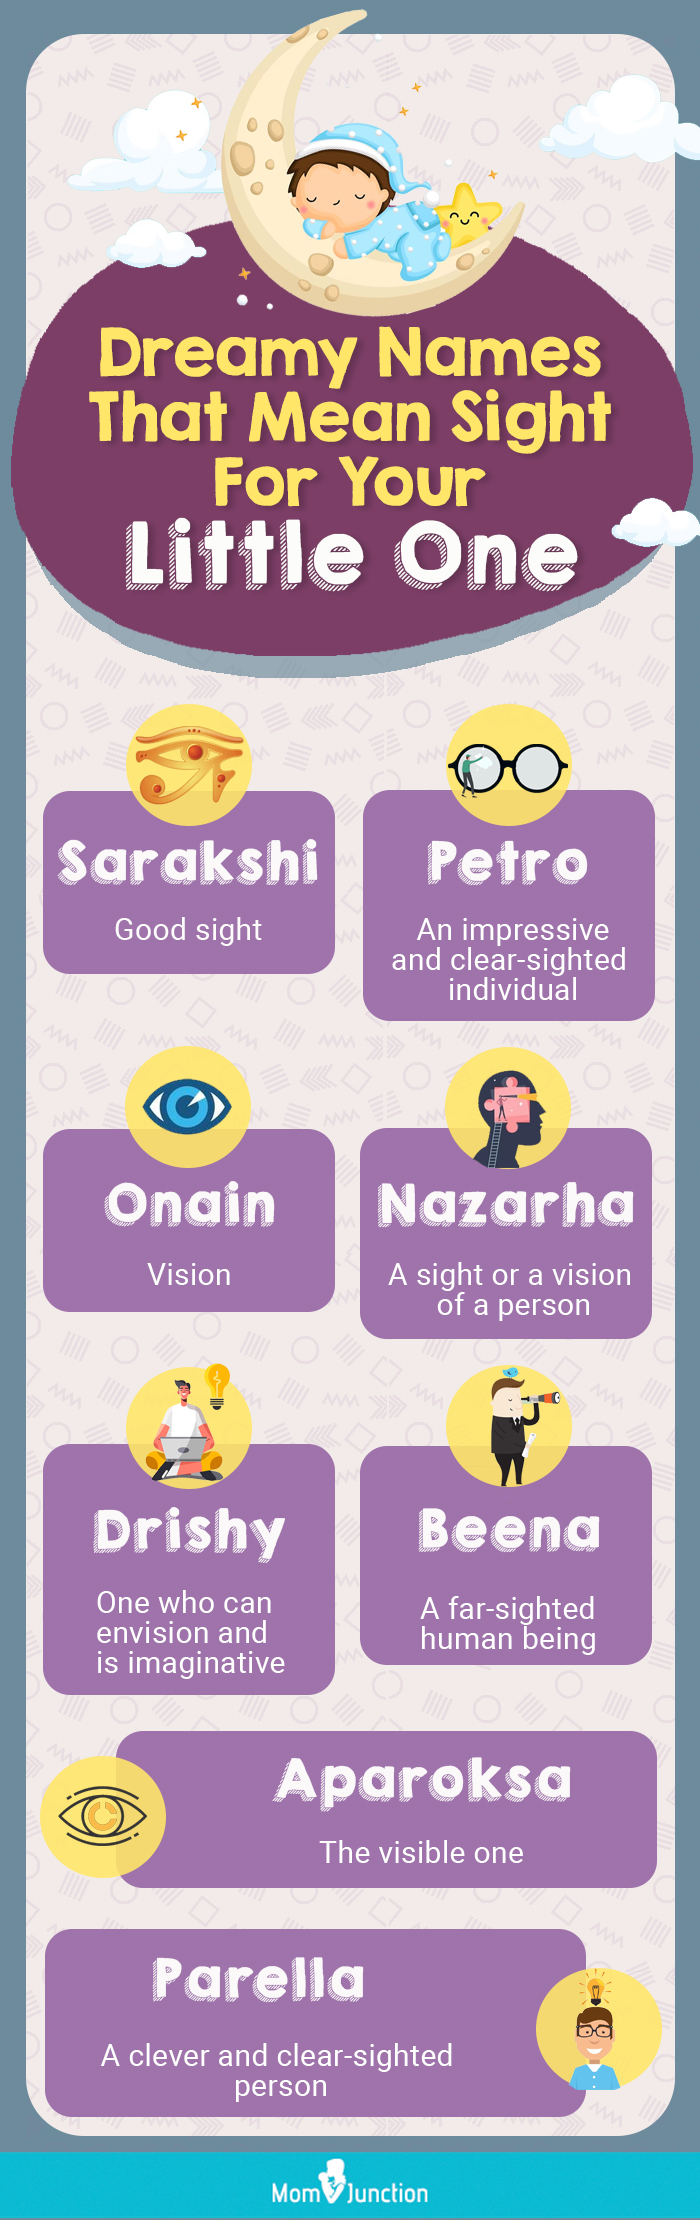 dreamy names that mean sight for your little one (infographic)